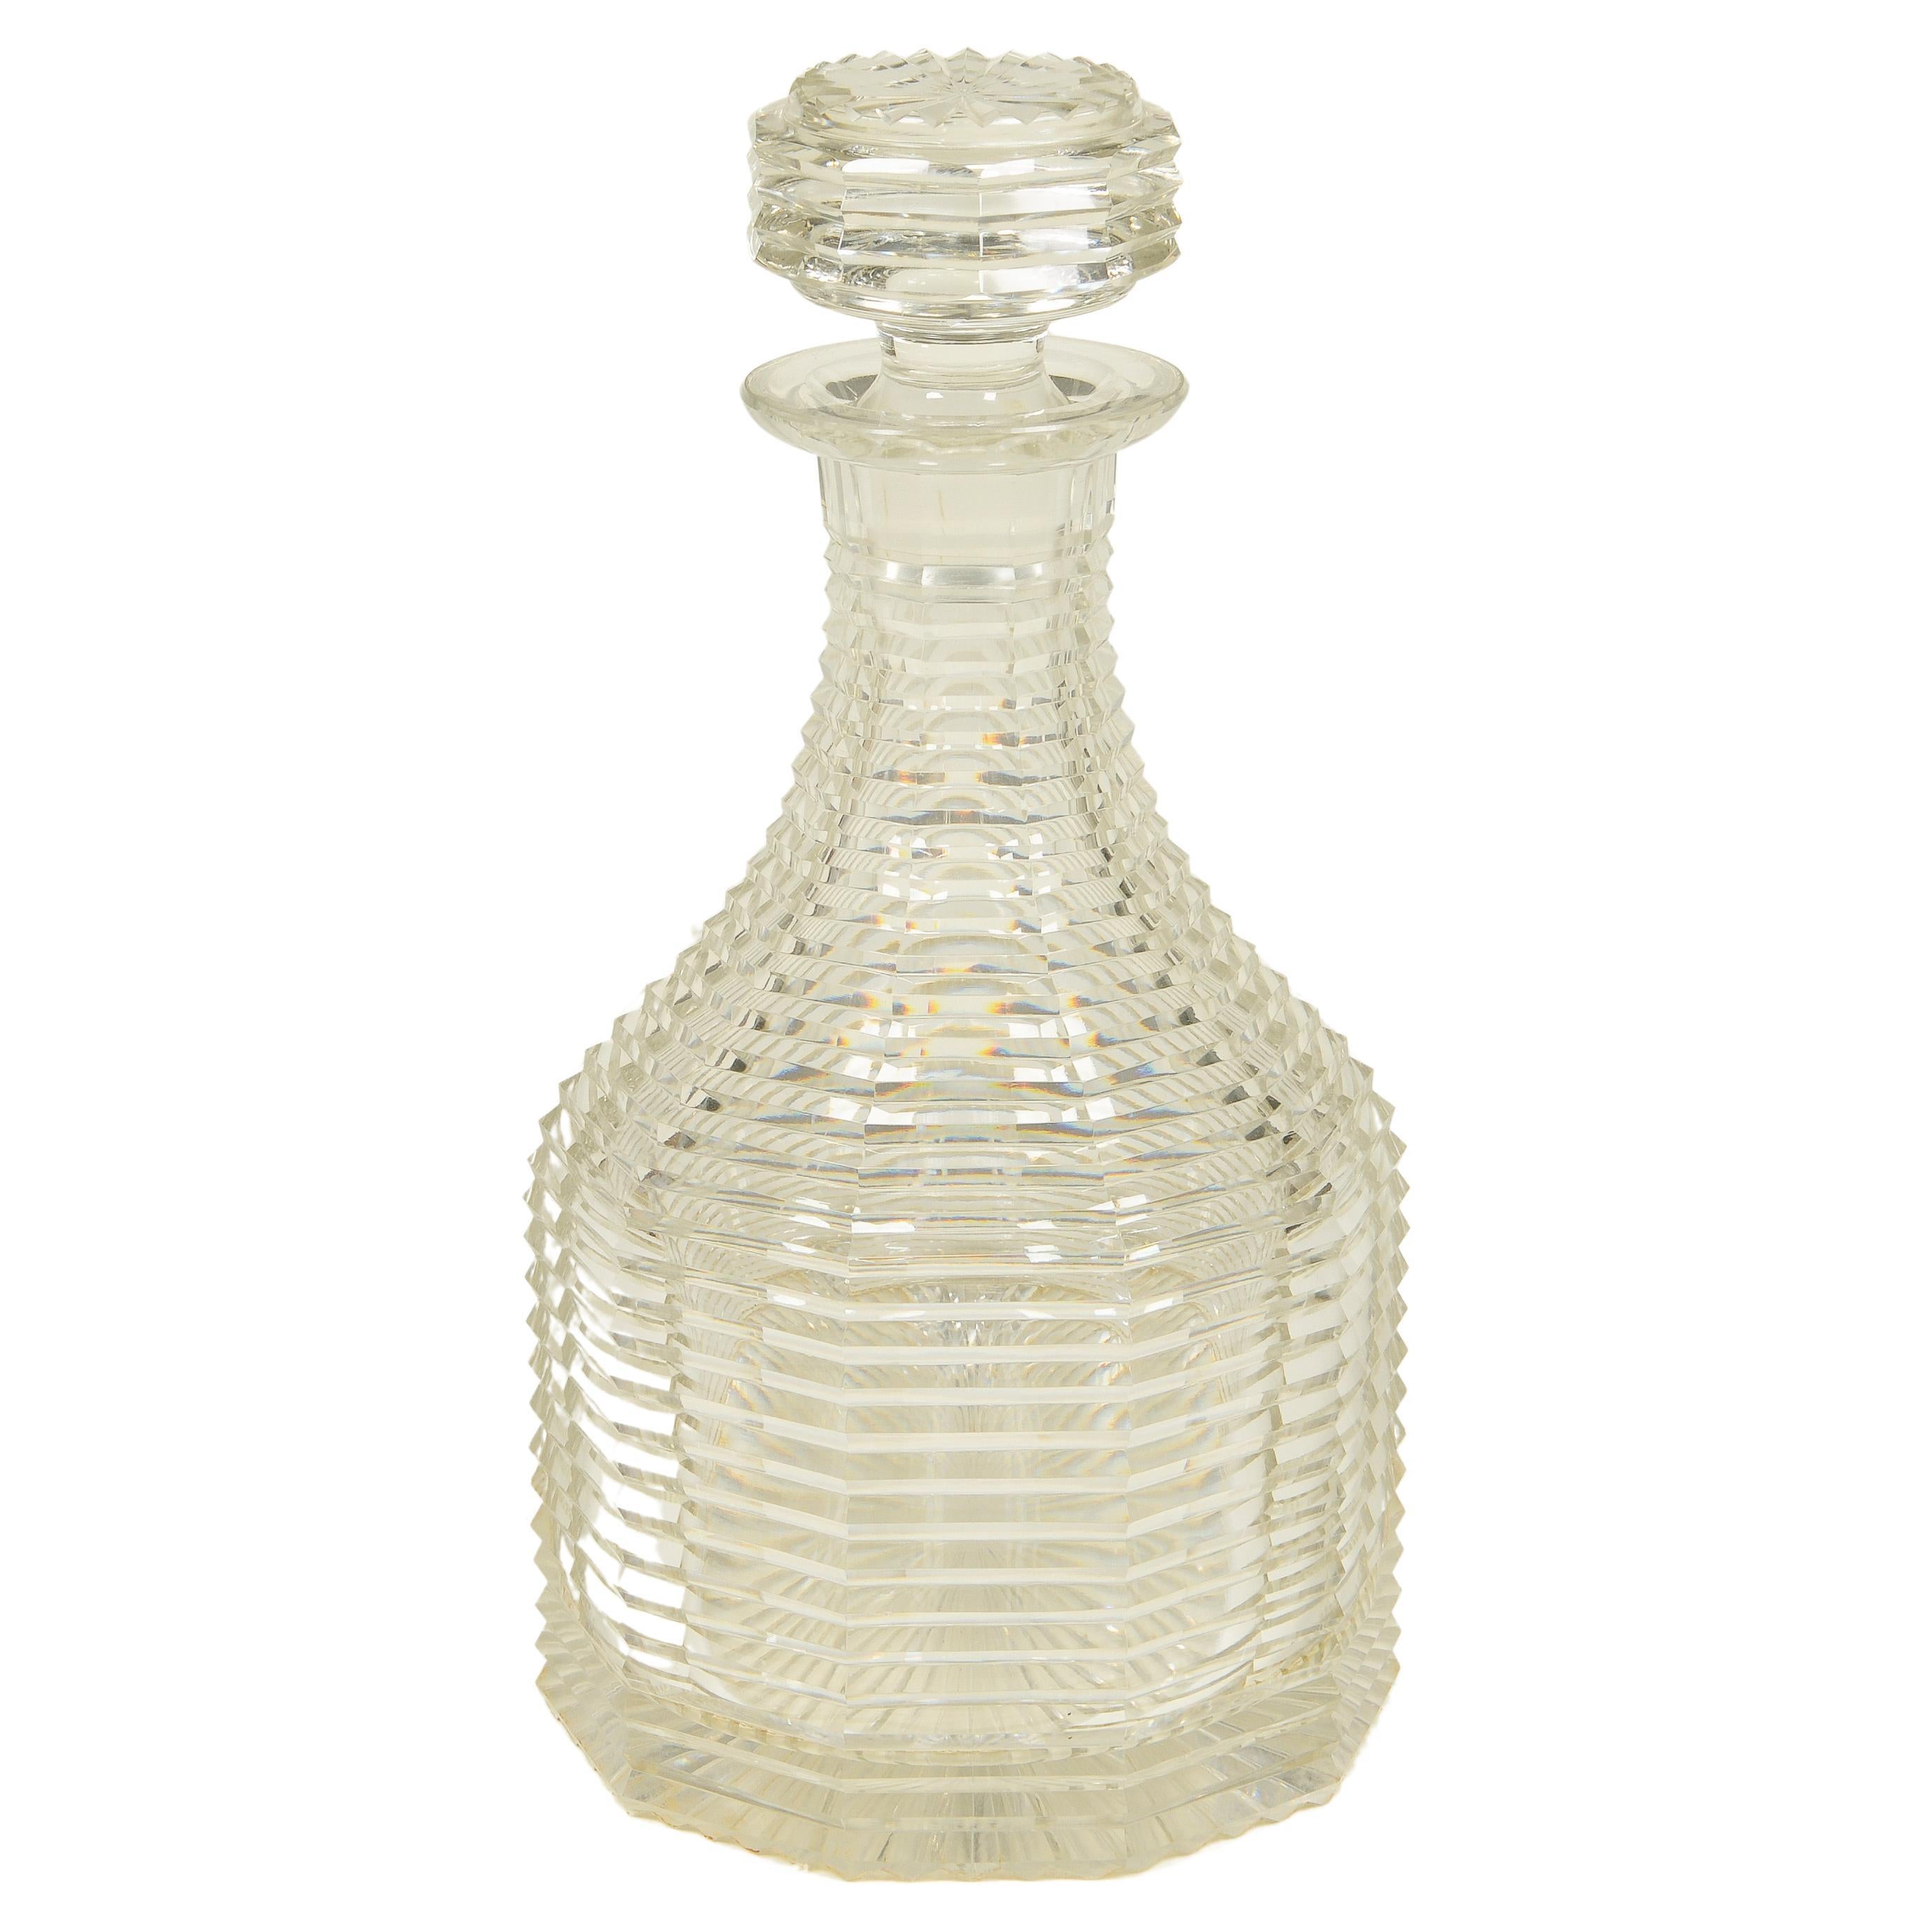 English Cut Crystal Decanter For Sale